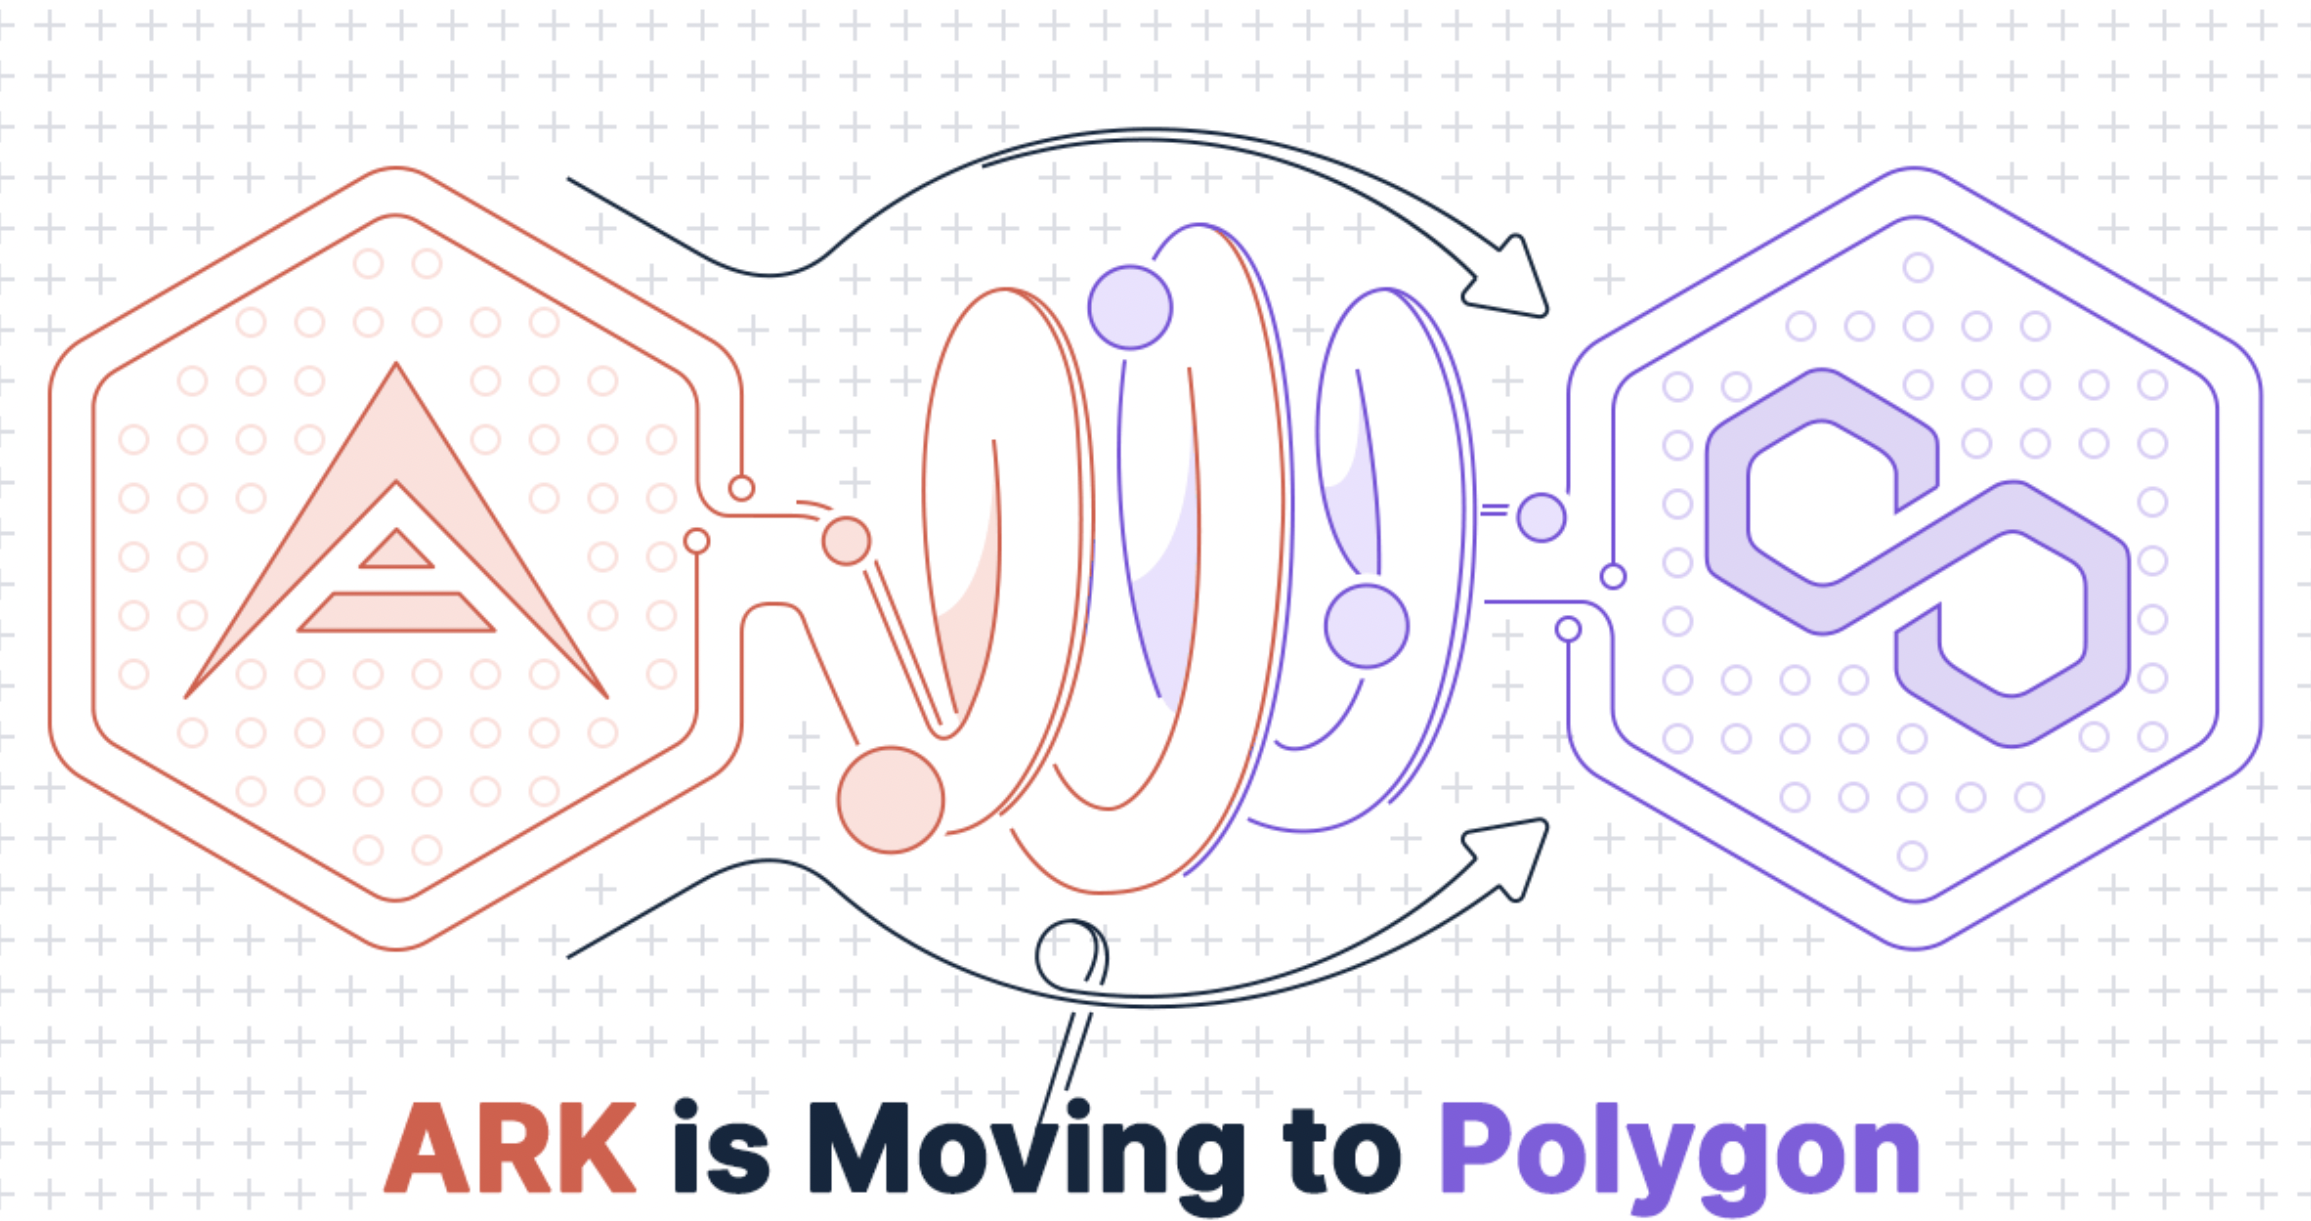 ARK Price pumps on Movement to Polygon